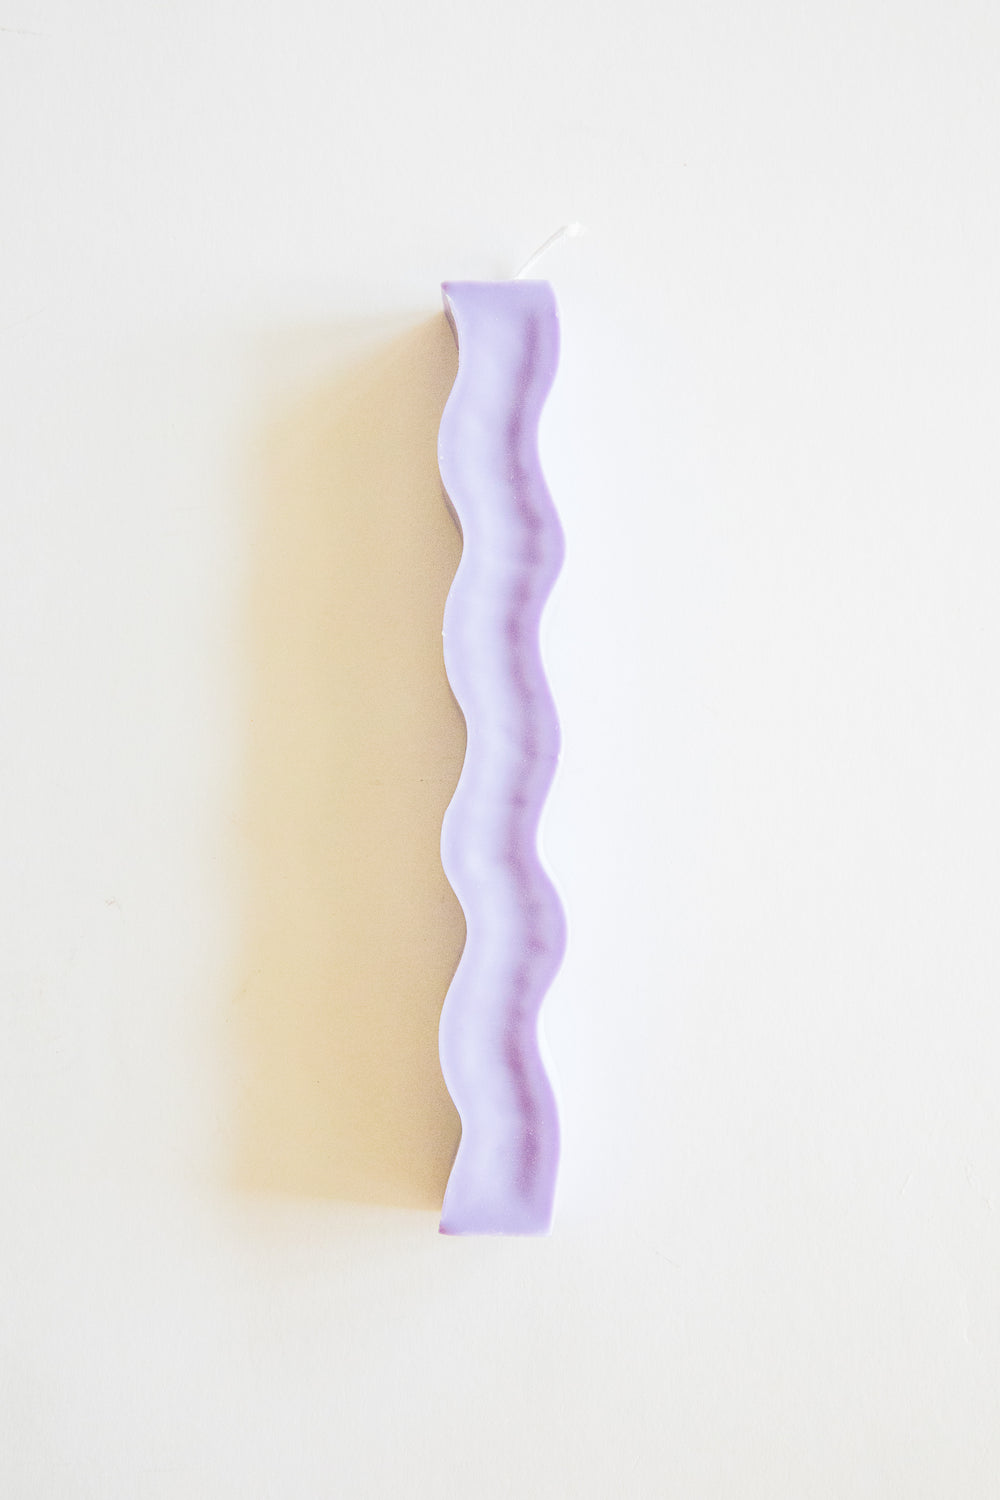 Lilac Squiggle Candle